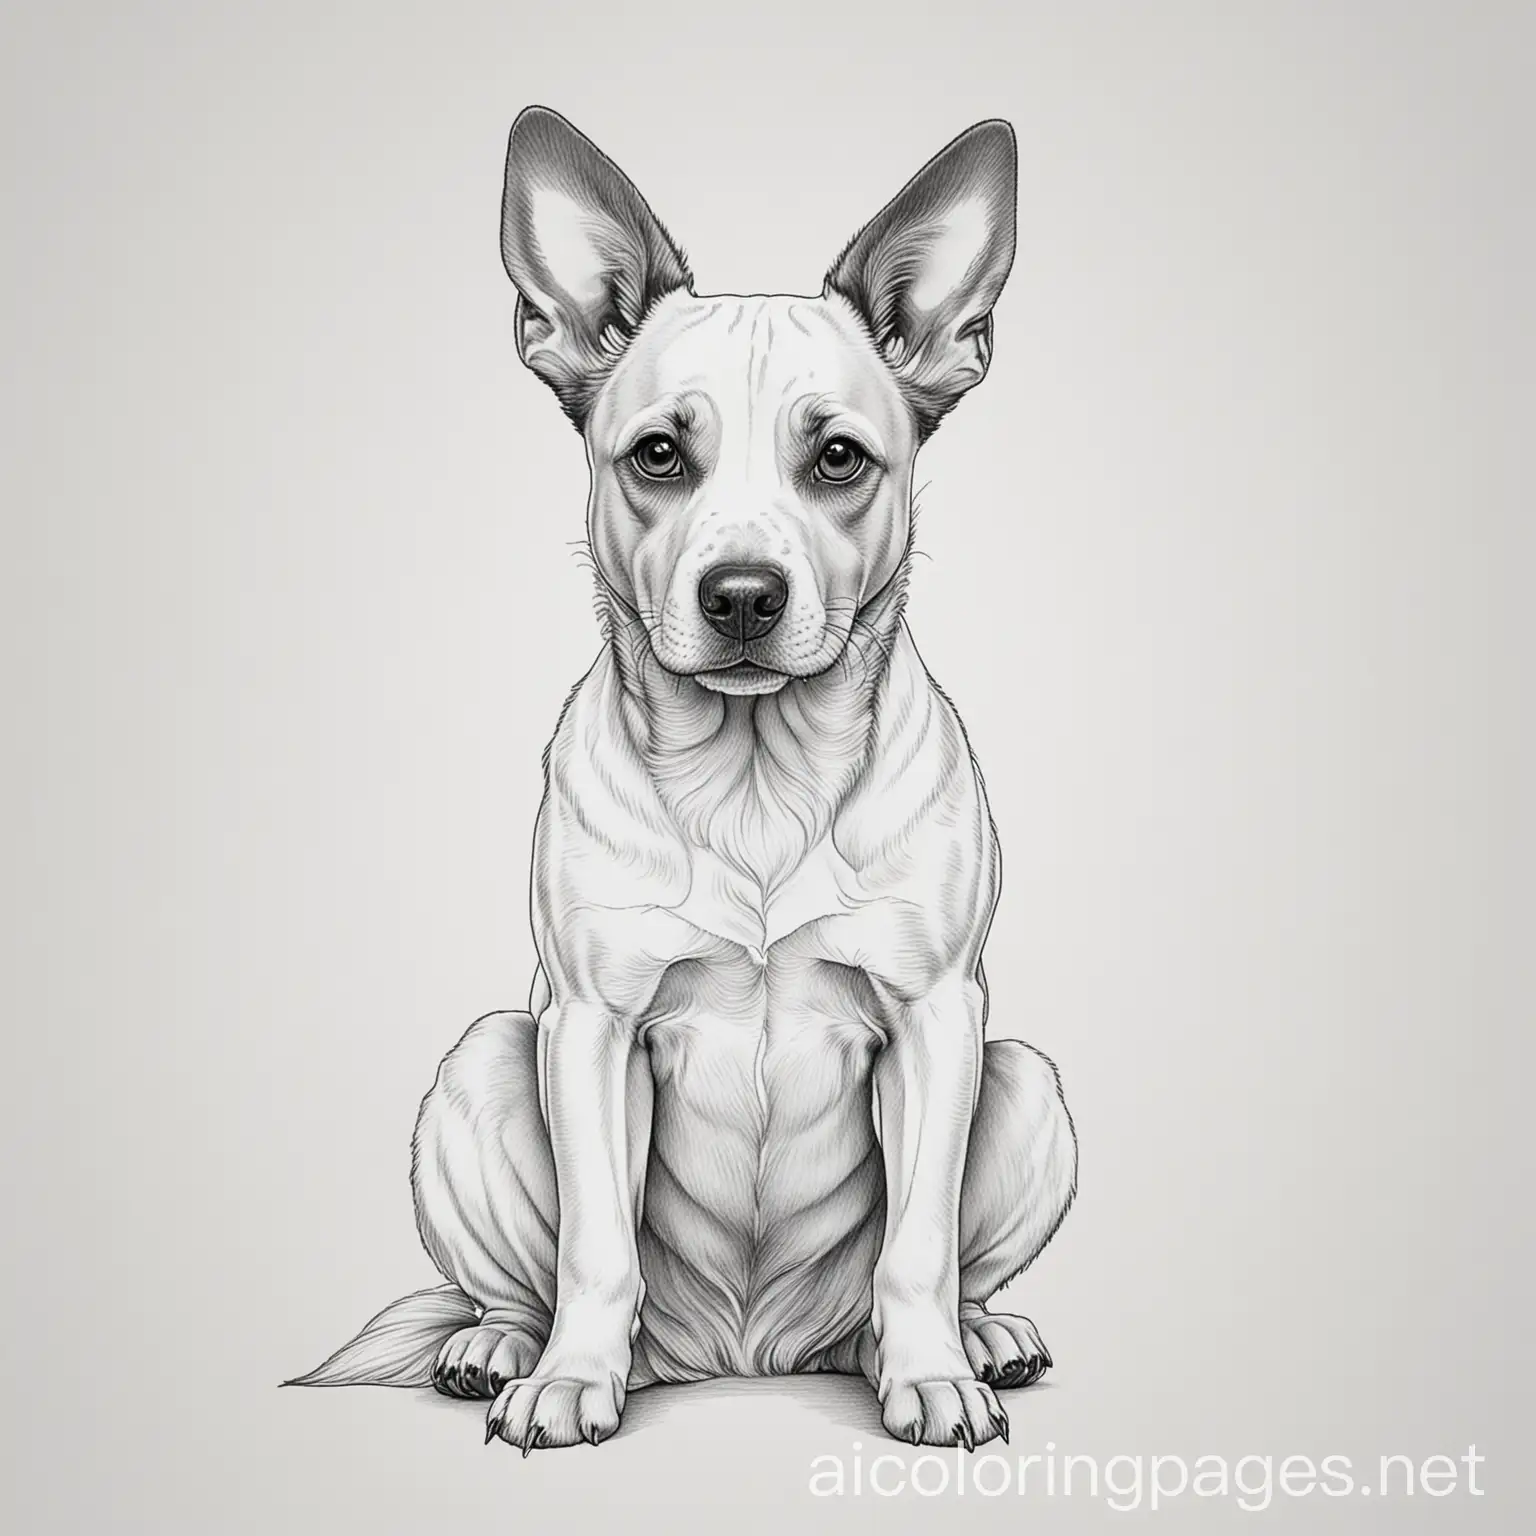 dog, Coloring Page, black and white, line art, white background, Simplicity, Ample White Space. The background of the coloring page is plain white to make it easy for young children to color within the lines. The outlines of all the subjects are easy to distinguish, making it simple for kids to color without too much difficulty